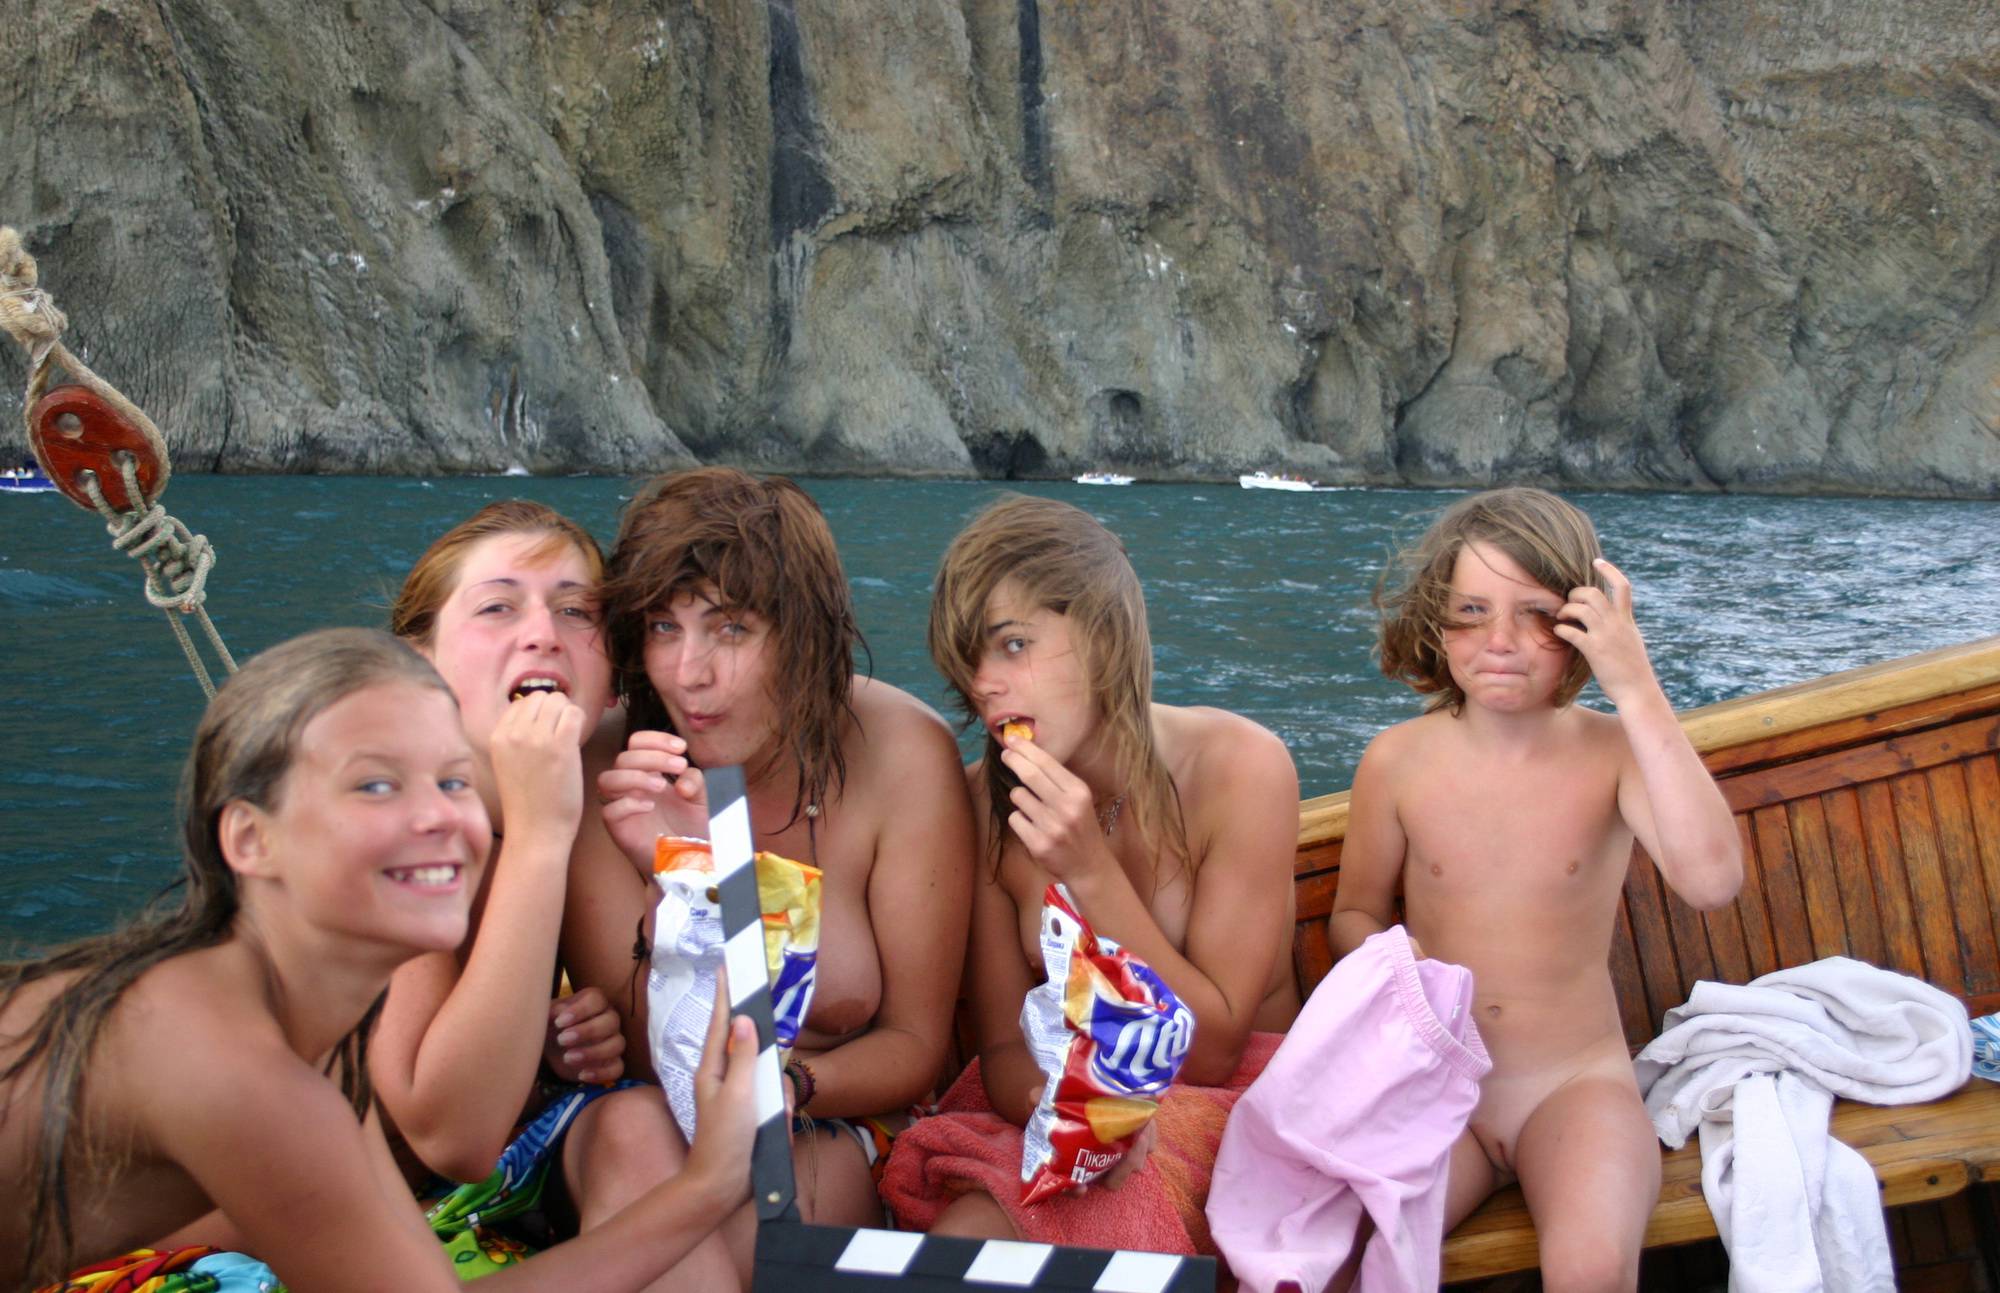 Purenudism Pics-Group Snacking on Boat - 1